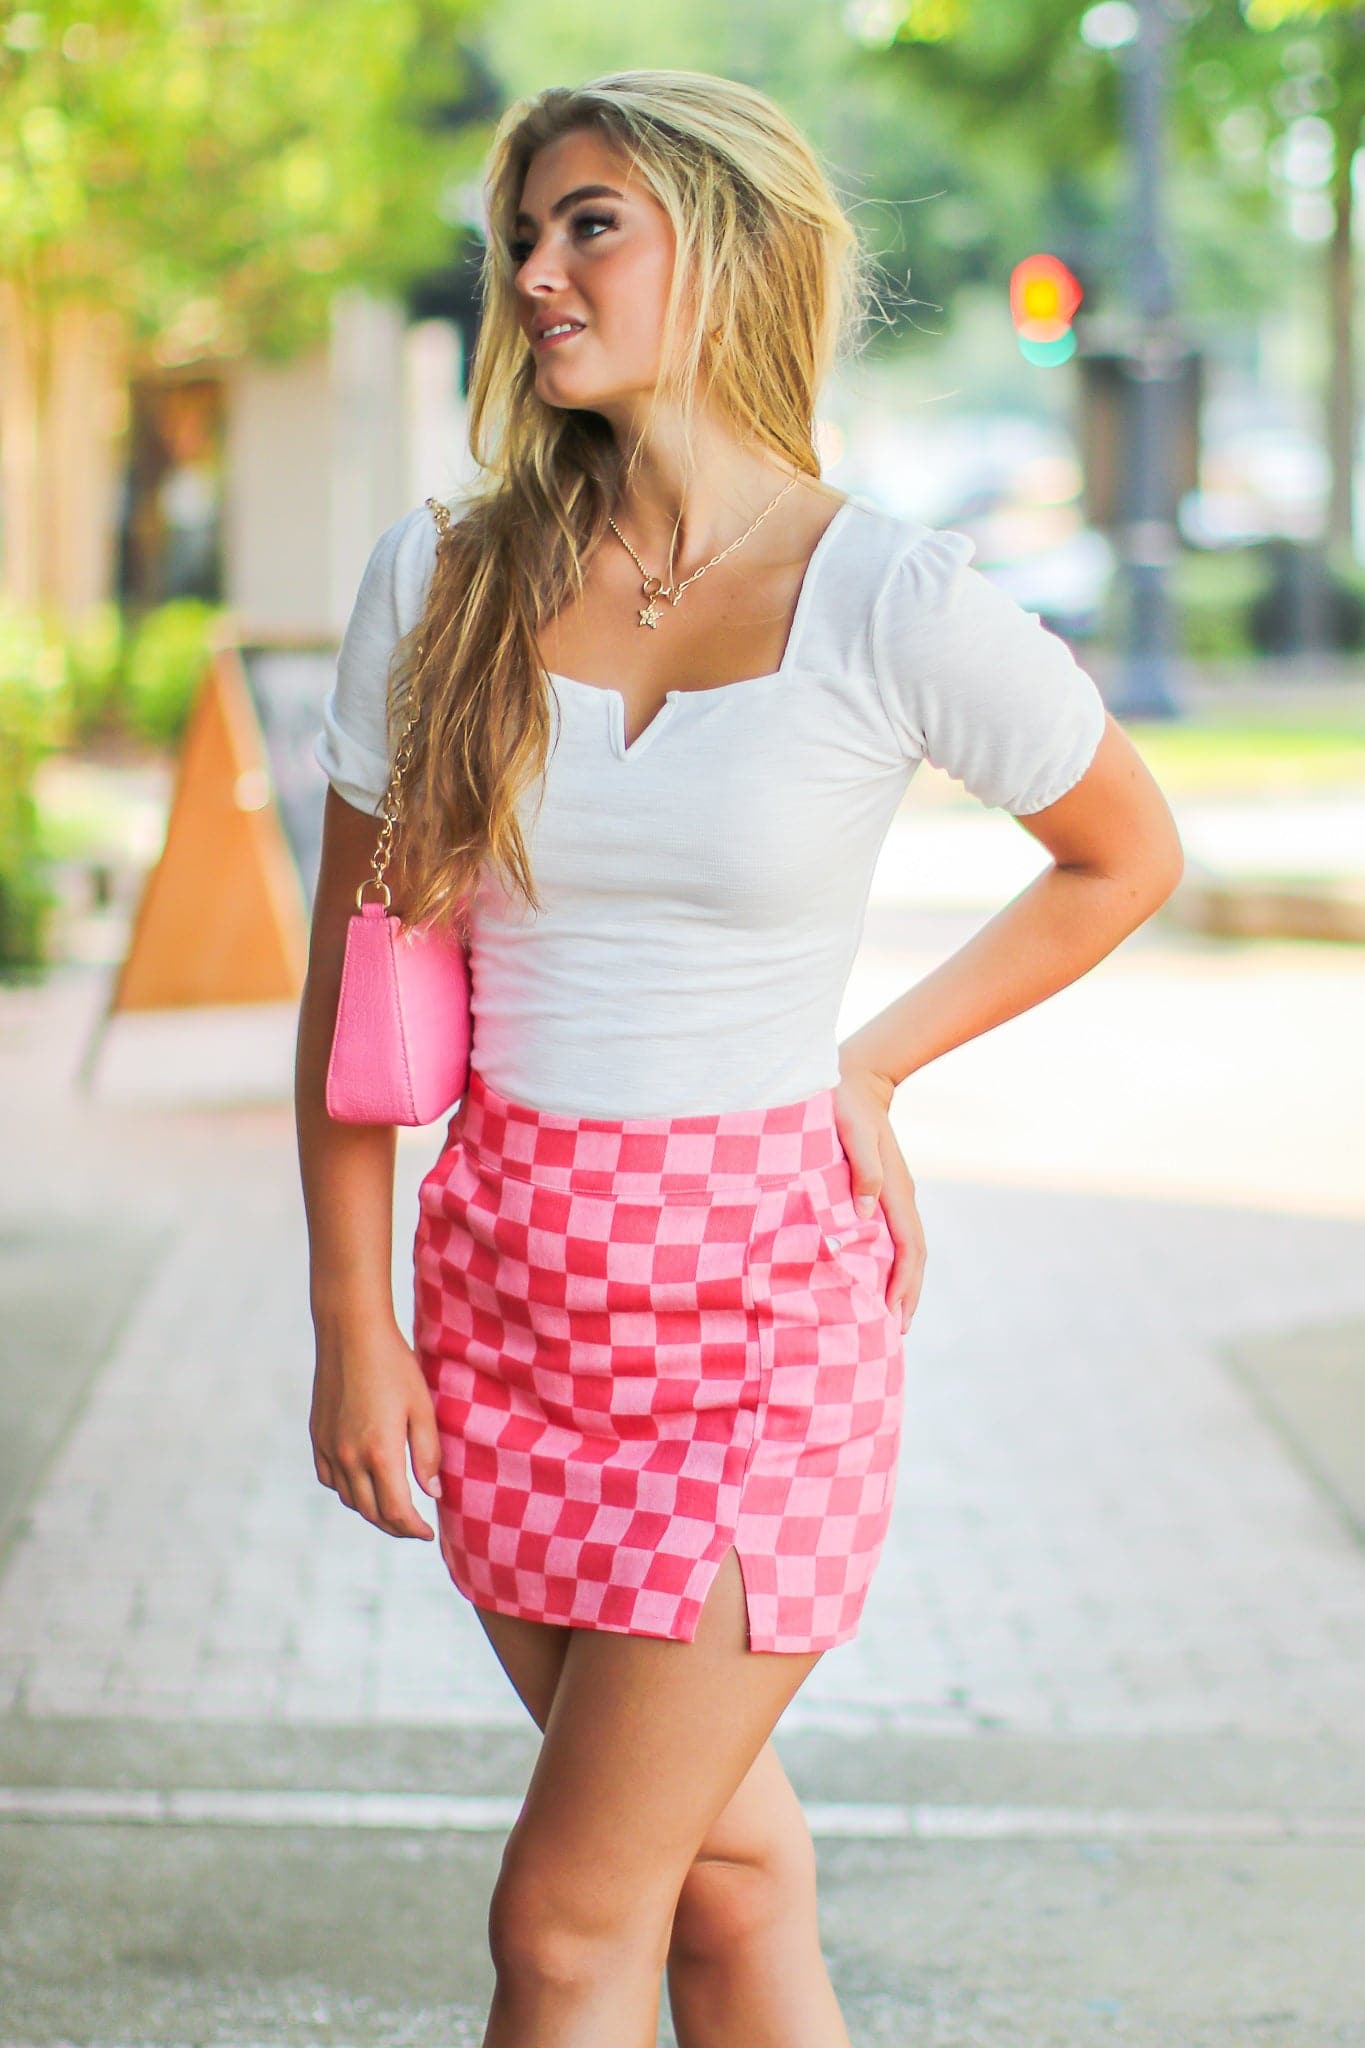  Full Effect Check Print Skirt - FINAL SALE - Madison and Mallory